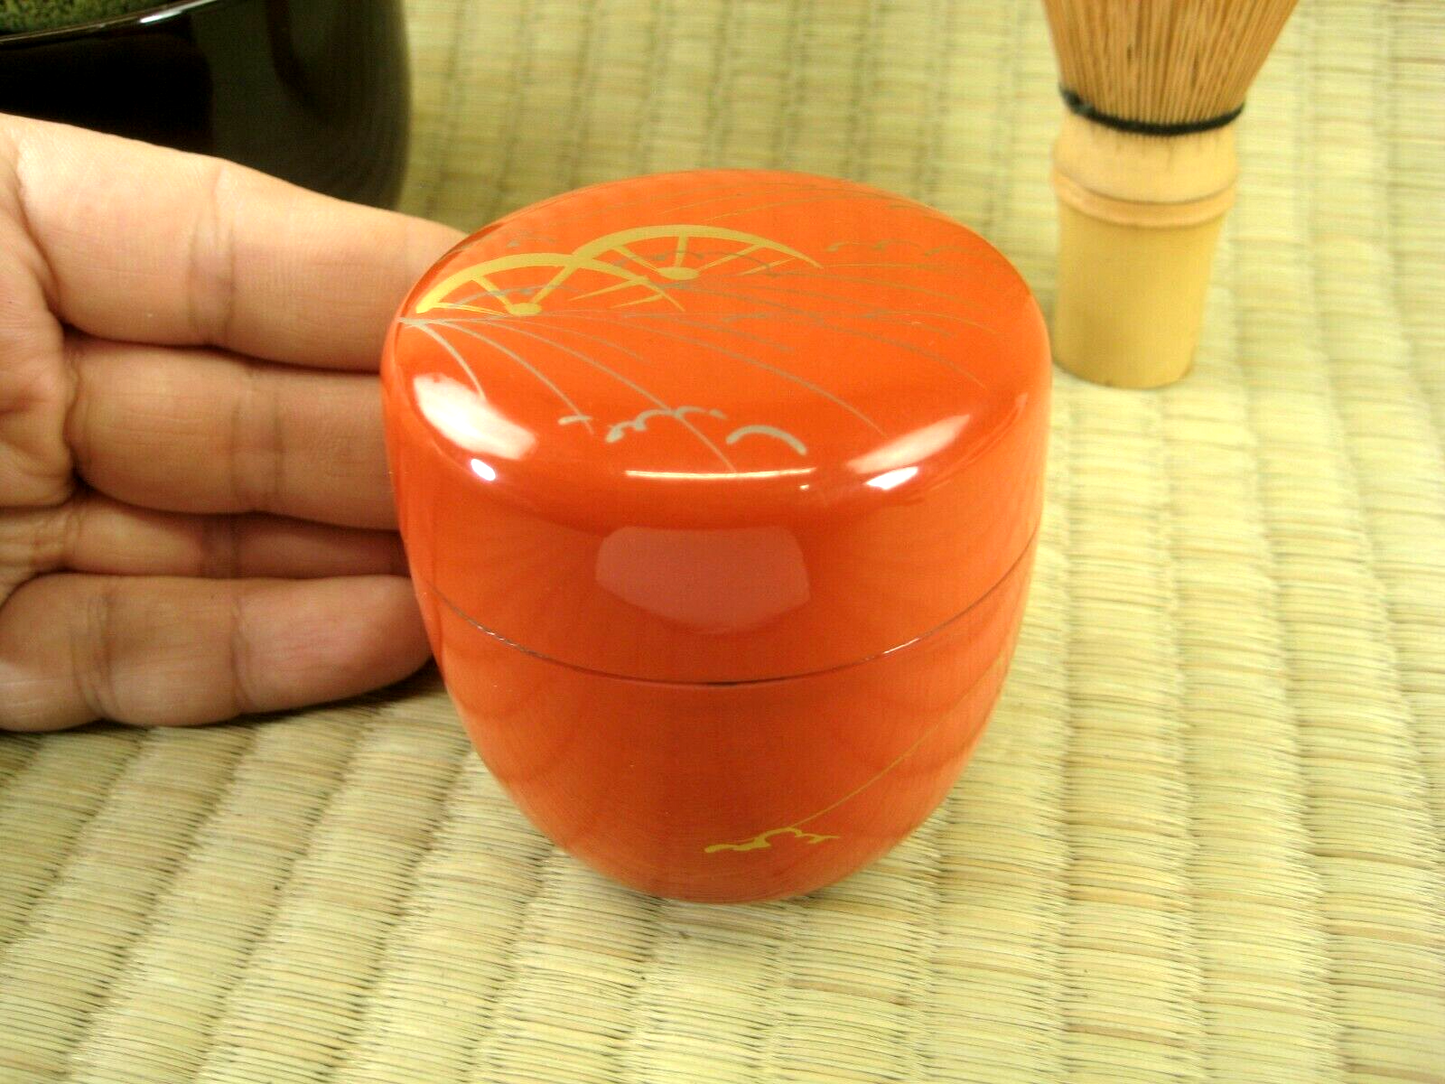 Vintage Japanese Tea Ceremony Natsume Tea Caddy Red Lacquer Cartwheel Wood